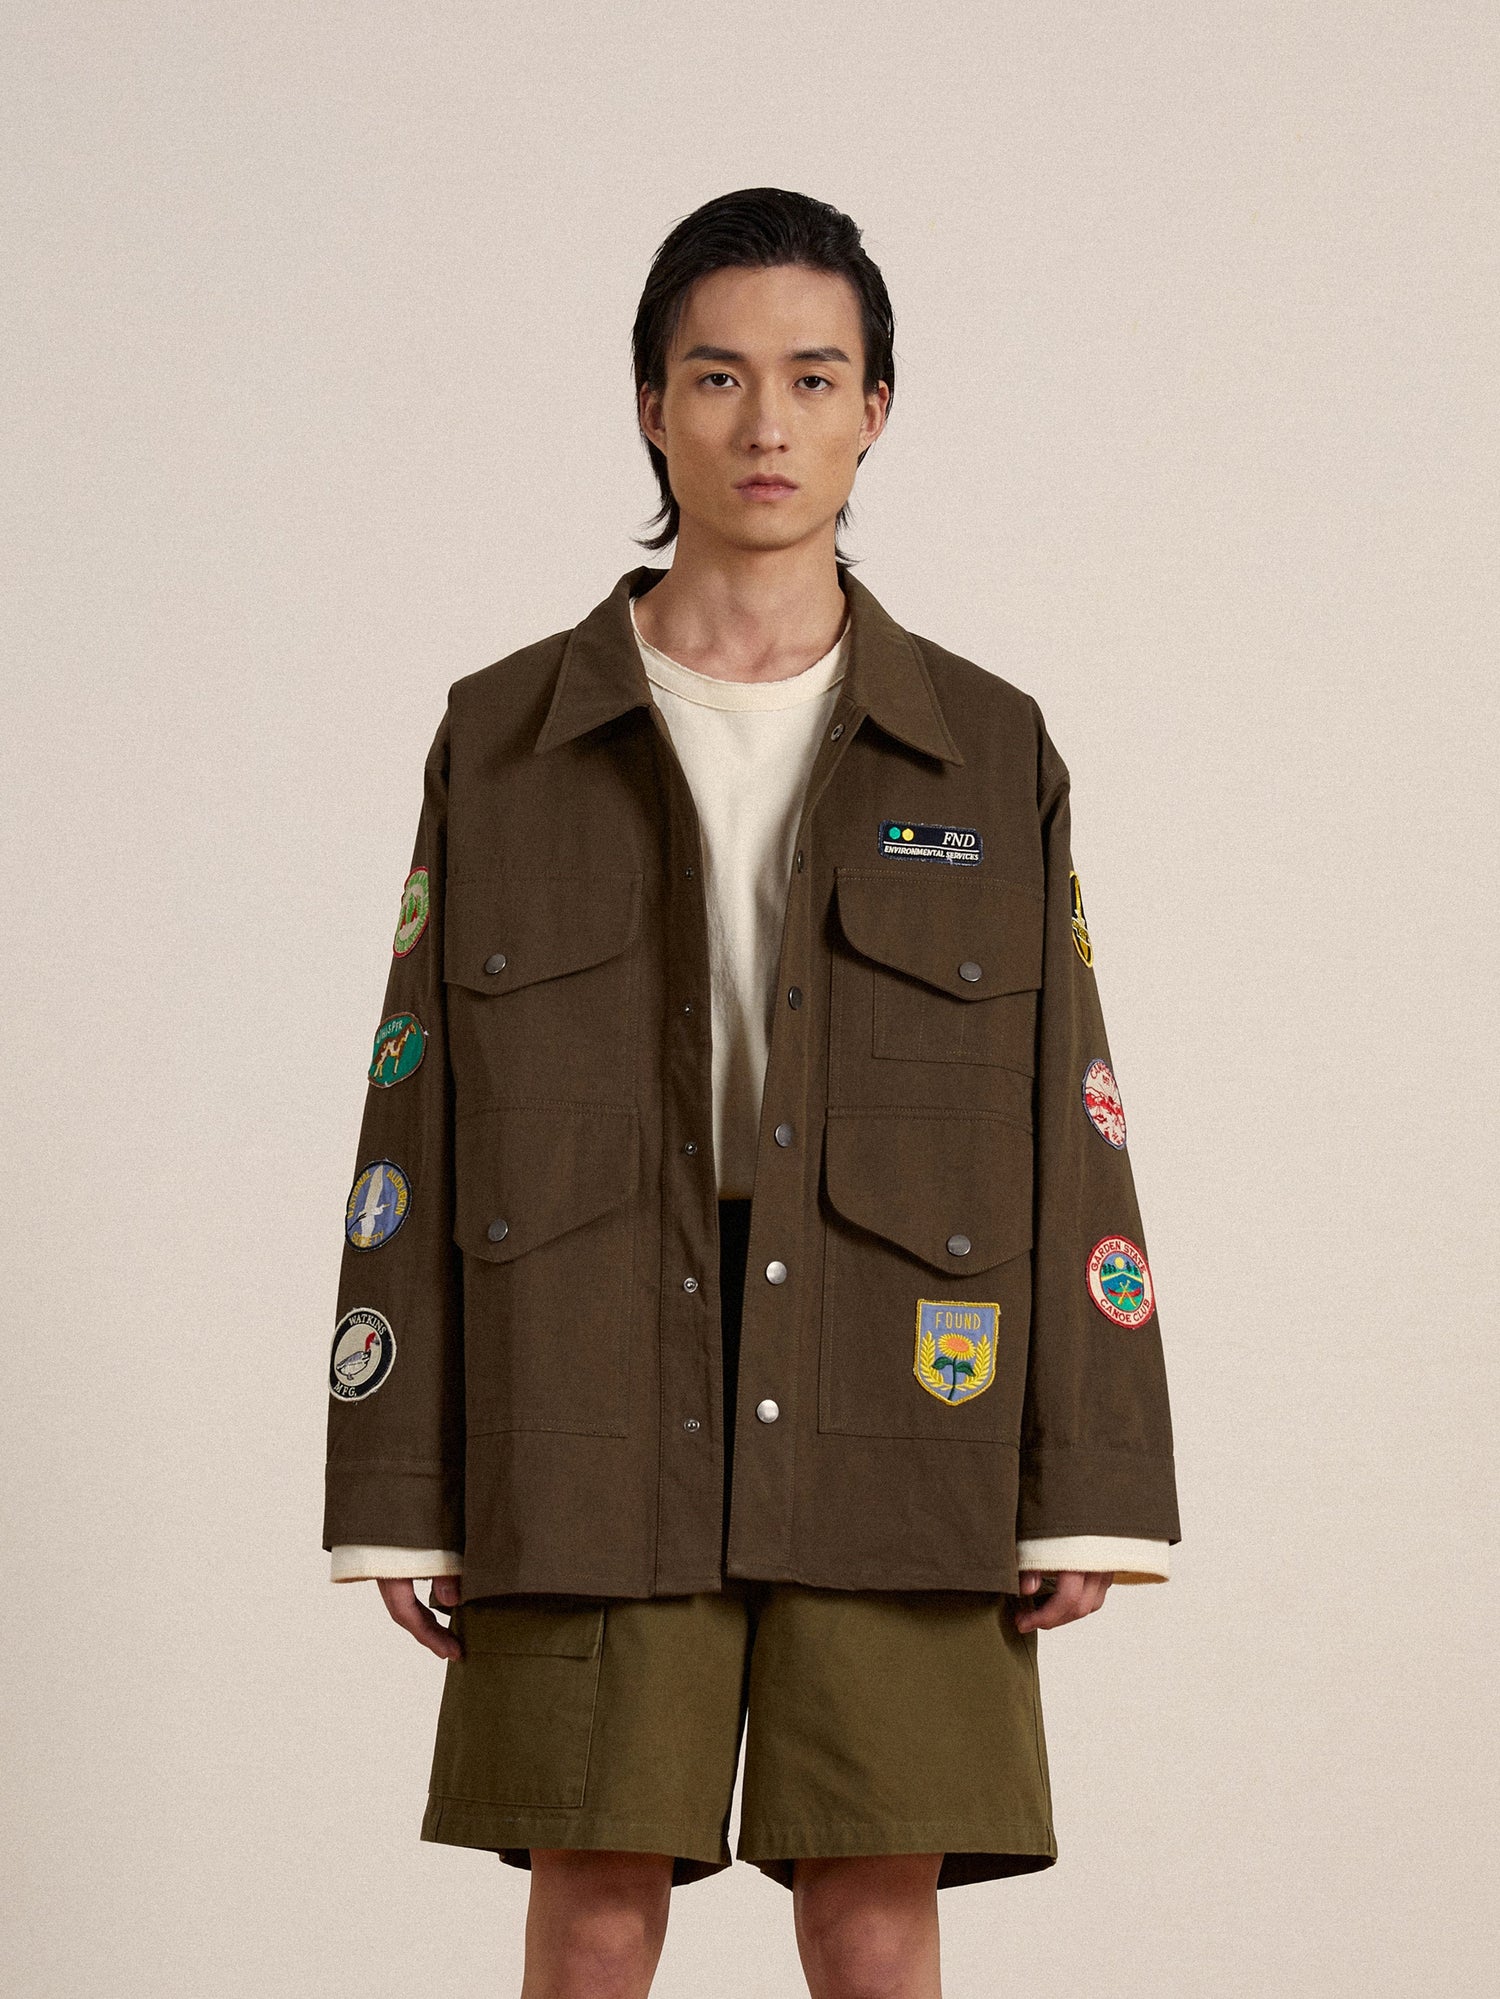 A man wearing a brown Found Multi Patch Work Jacket with embroidered patches on it.